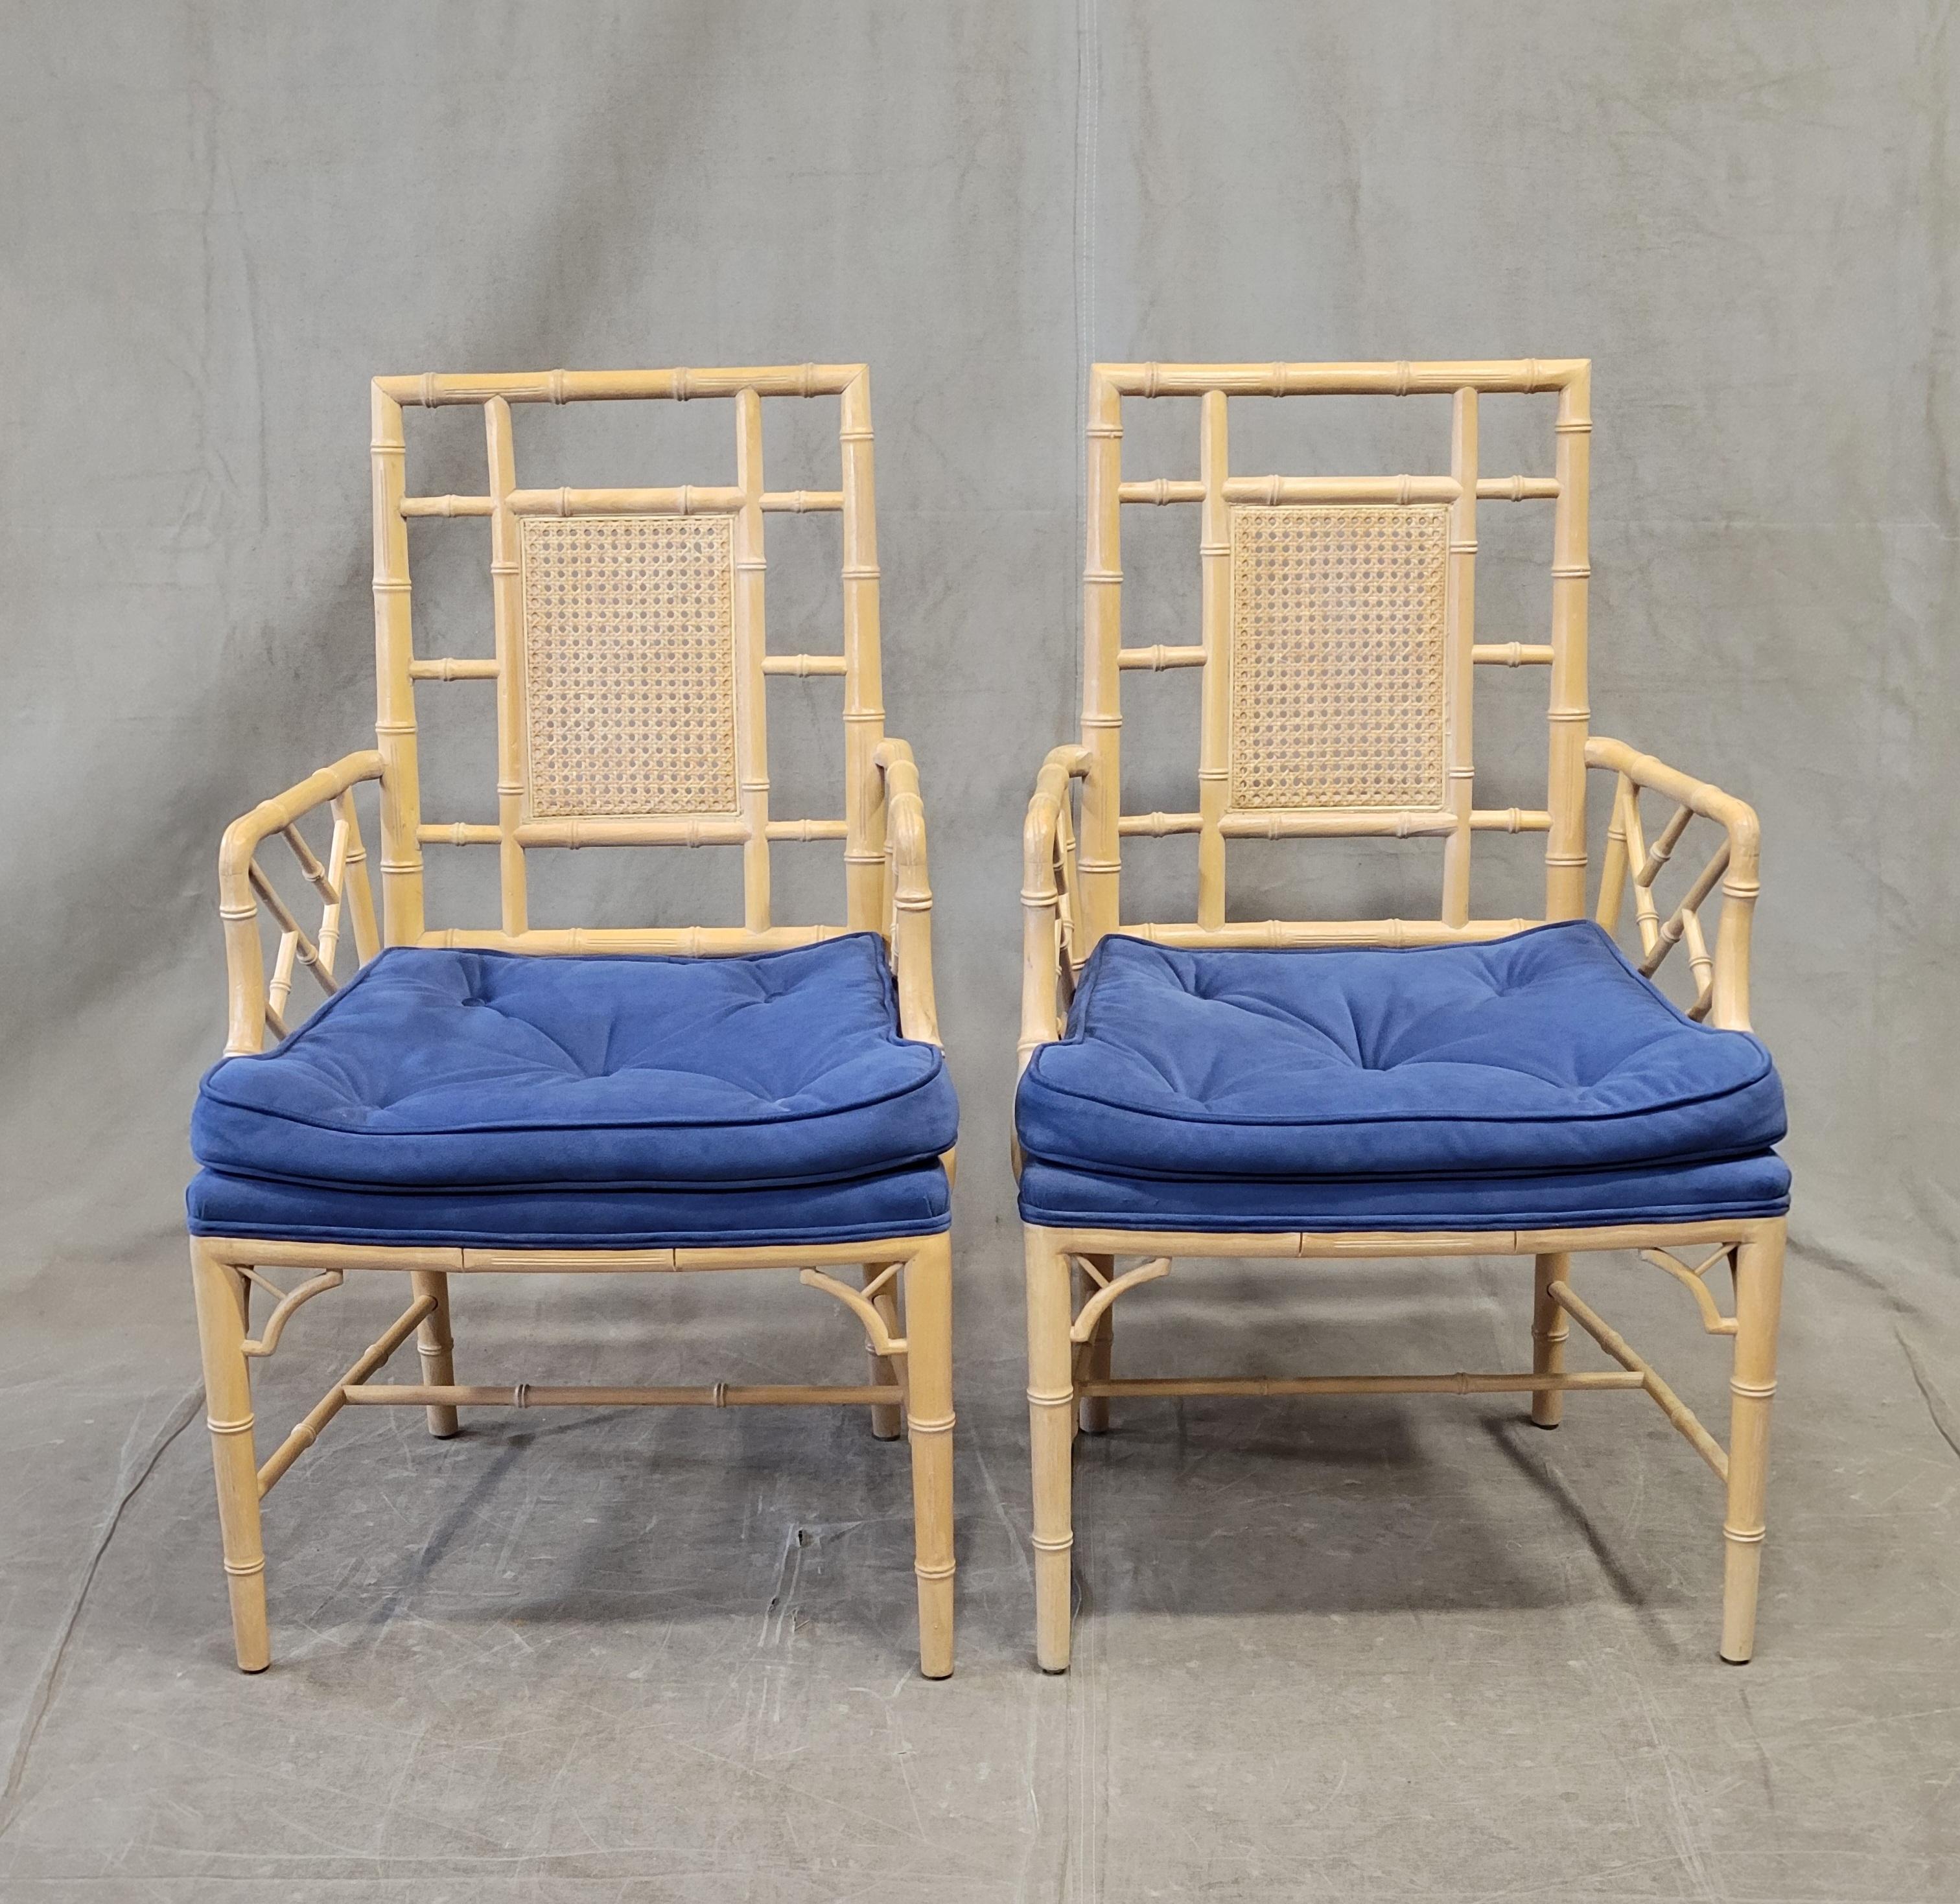 Chinoiserie Vintage Faux Bamboo Chairs With Blue Cushions - a Pair For Sale